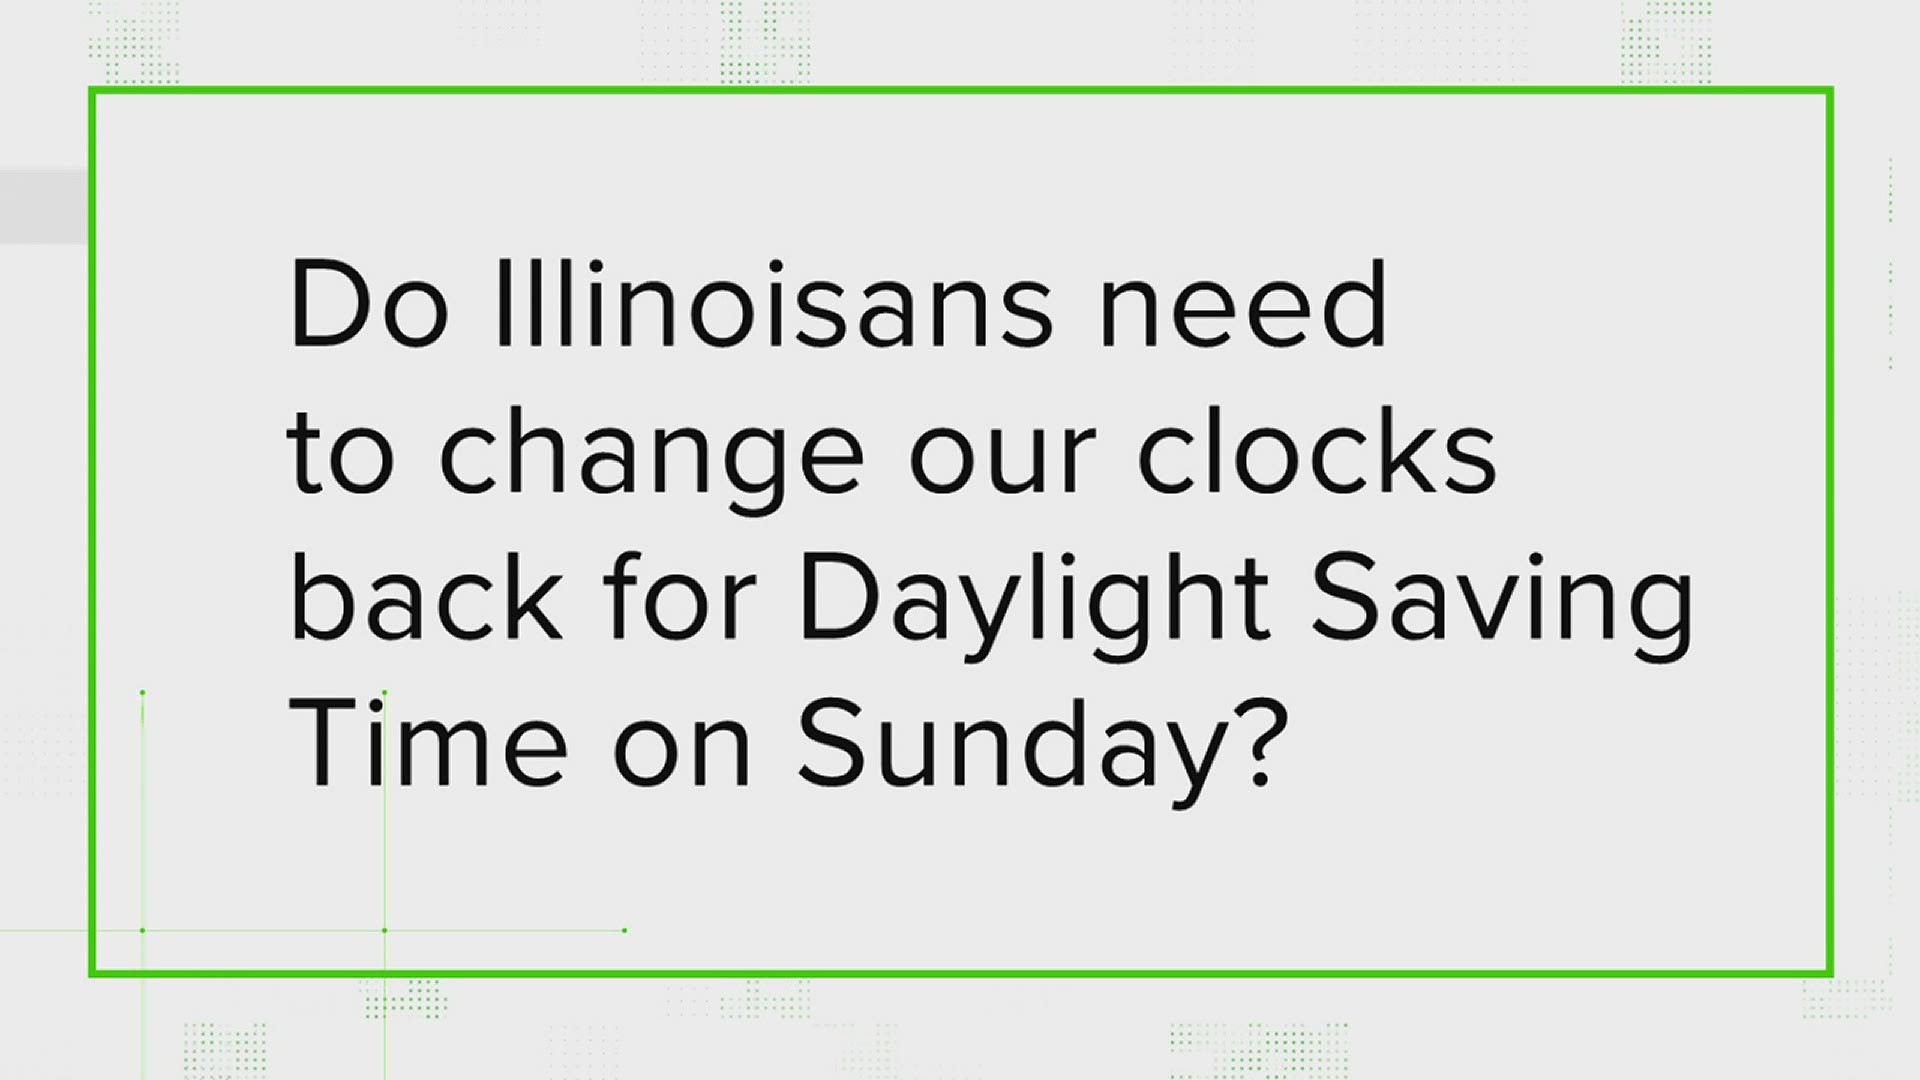 We're verifying what the end of Daylight Saving Time means for people living in Illinois.